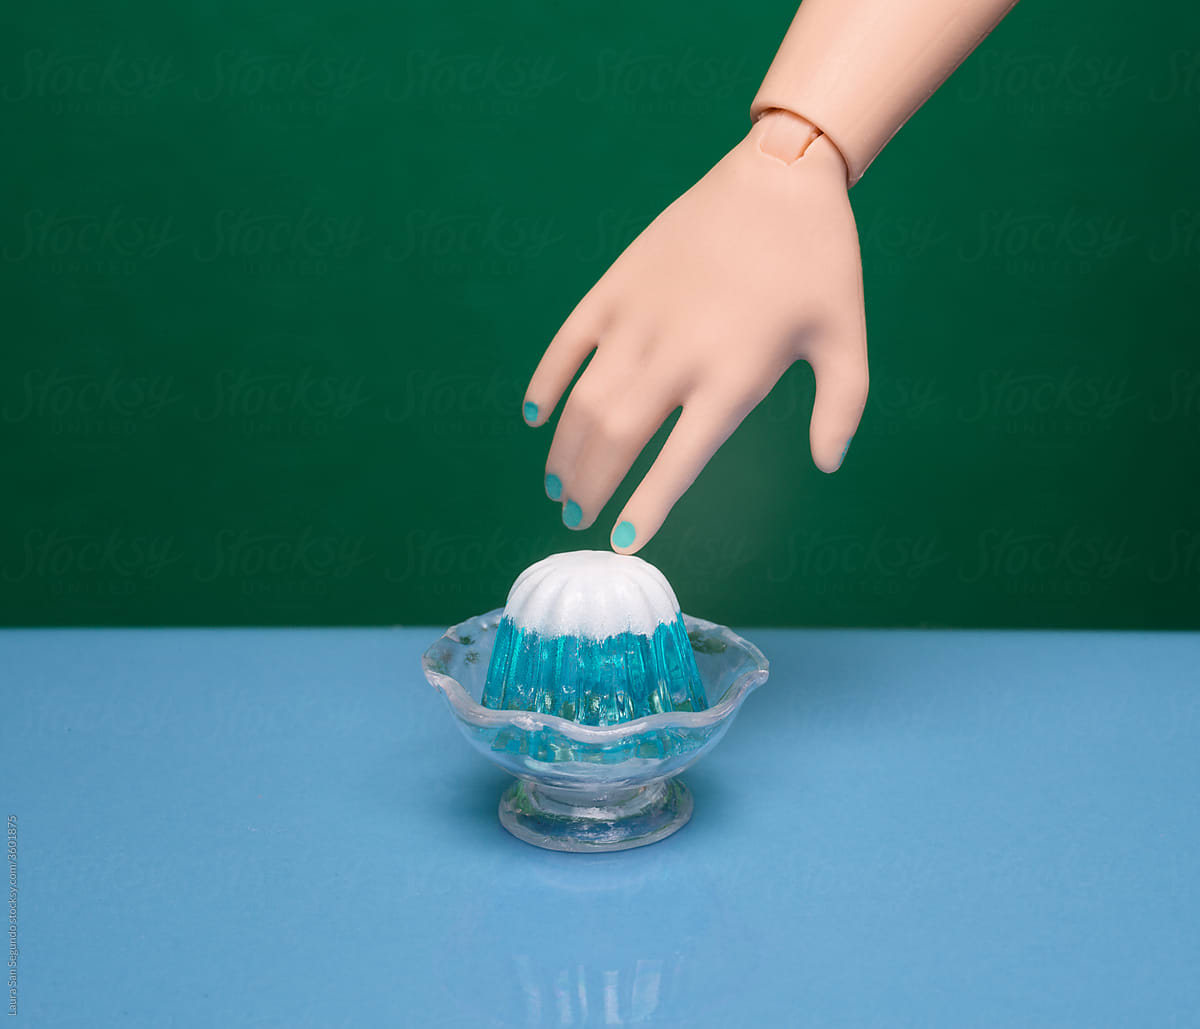 Miniature mountain-shaped jelly dessert being touched by a pointing finger